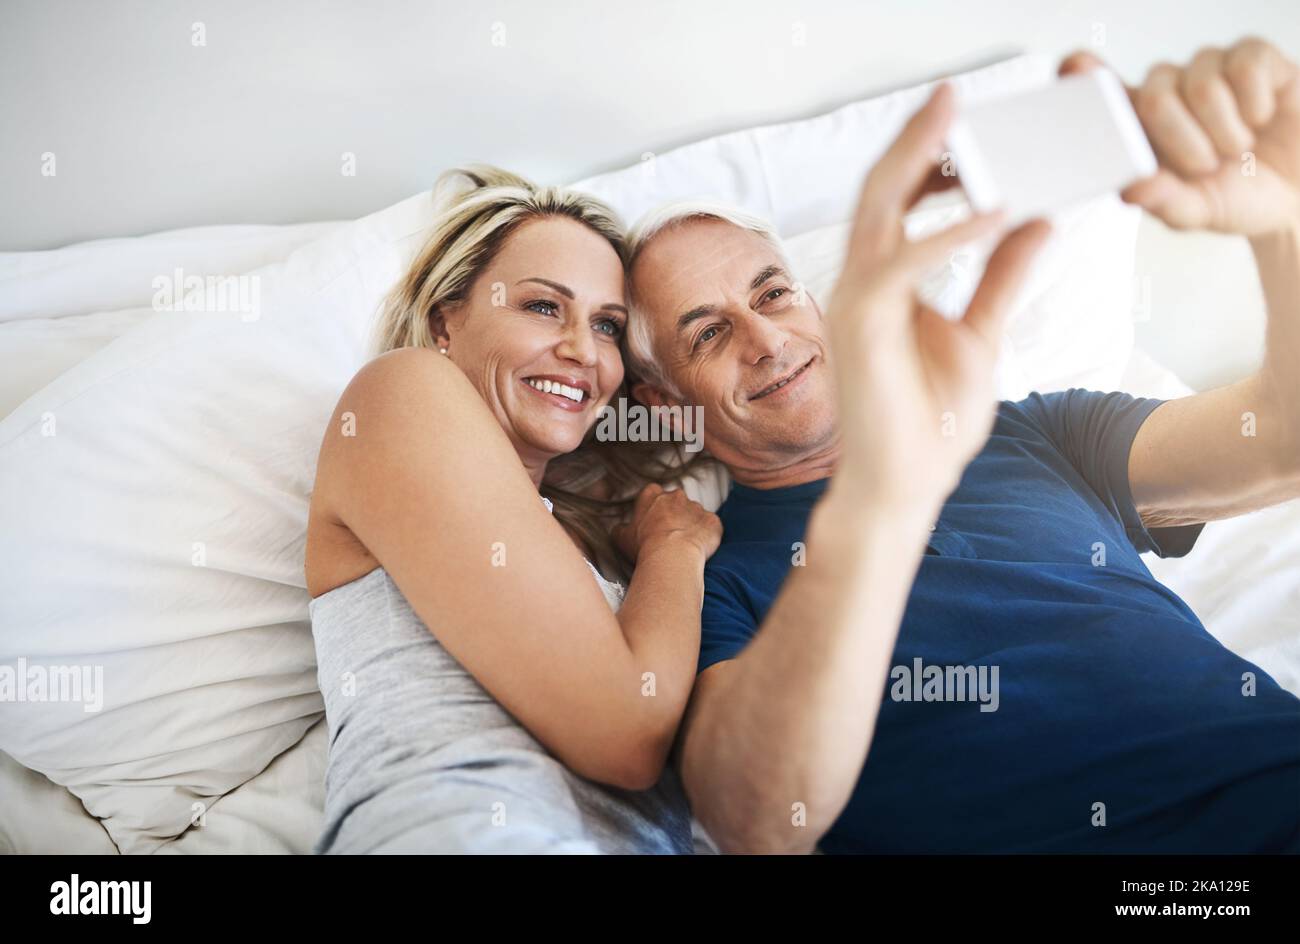 Capturing moments of love. an affectionate mature couple taking selfies in bed together at home. Stock Photo